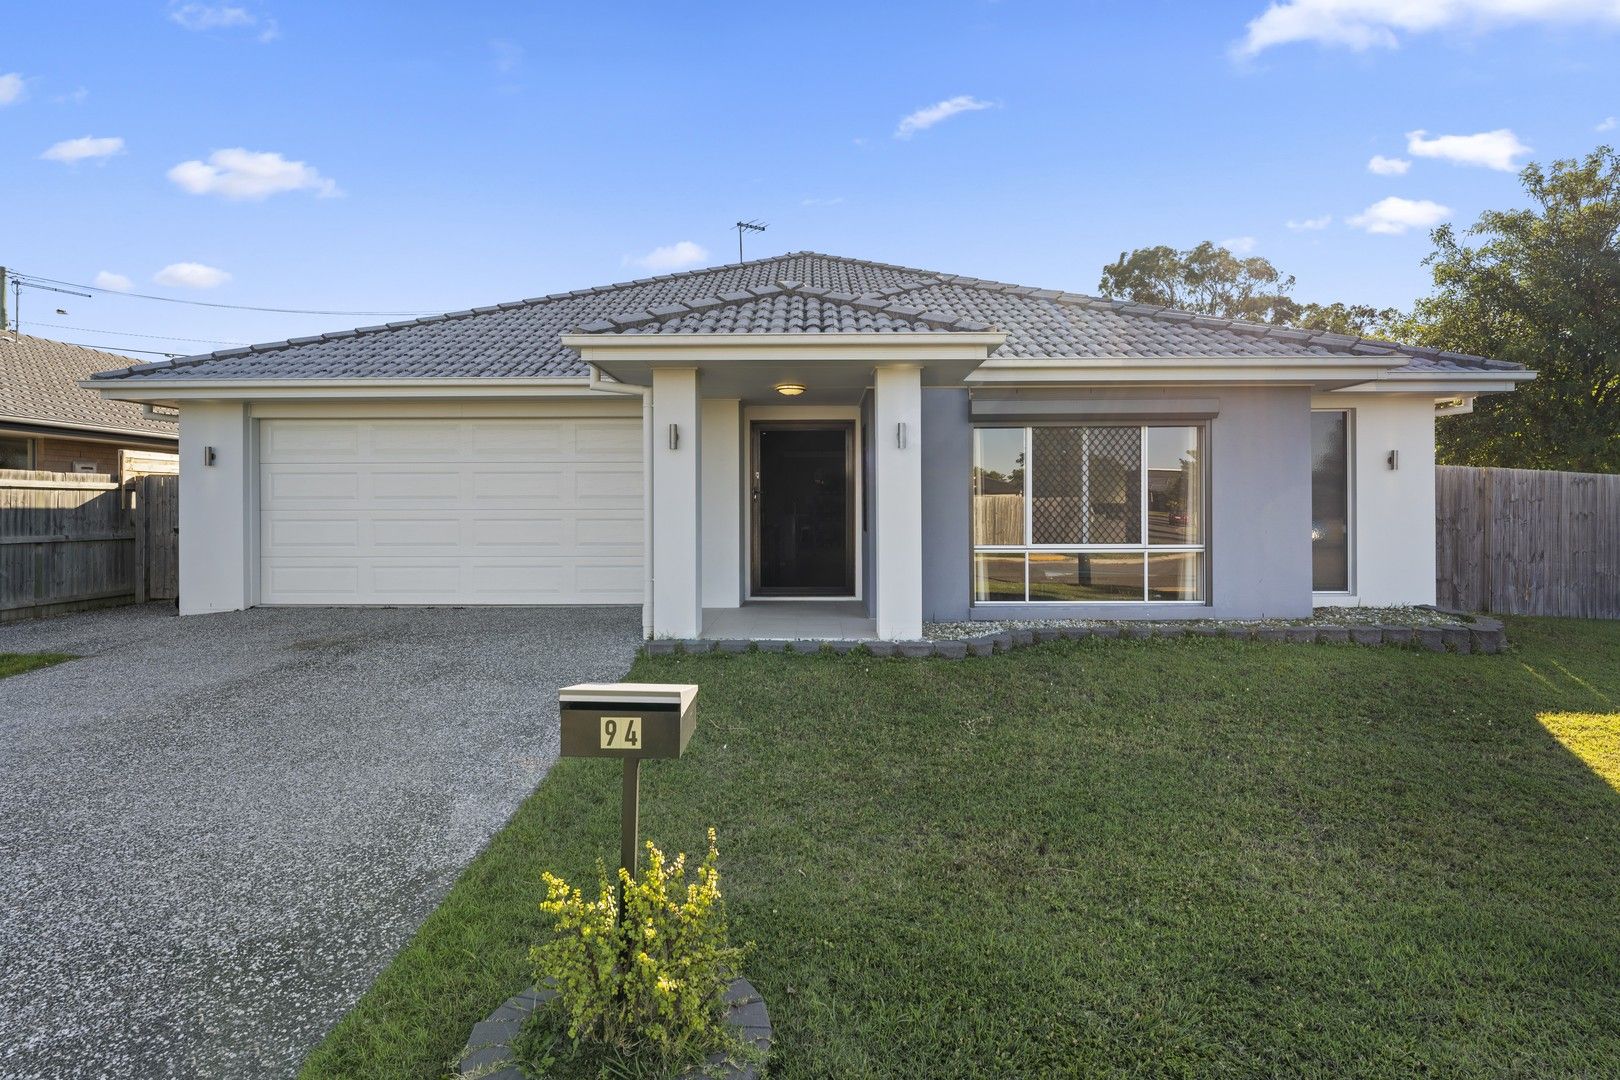 4 bedrooms House in 1 South Quarter Drive LOGANLEA QLD, 4131